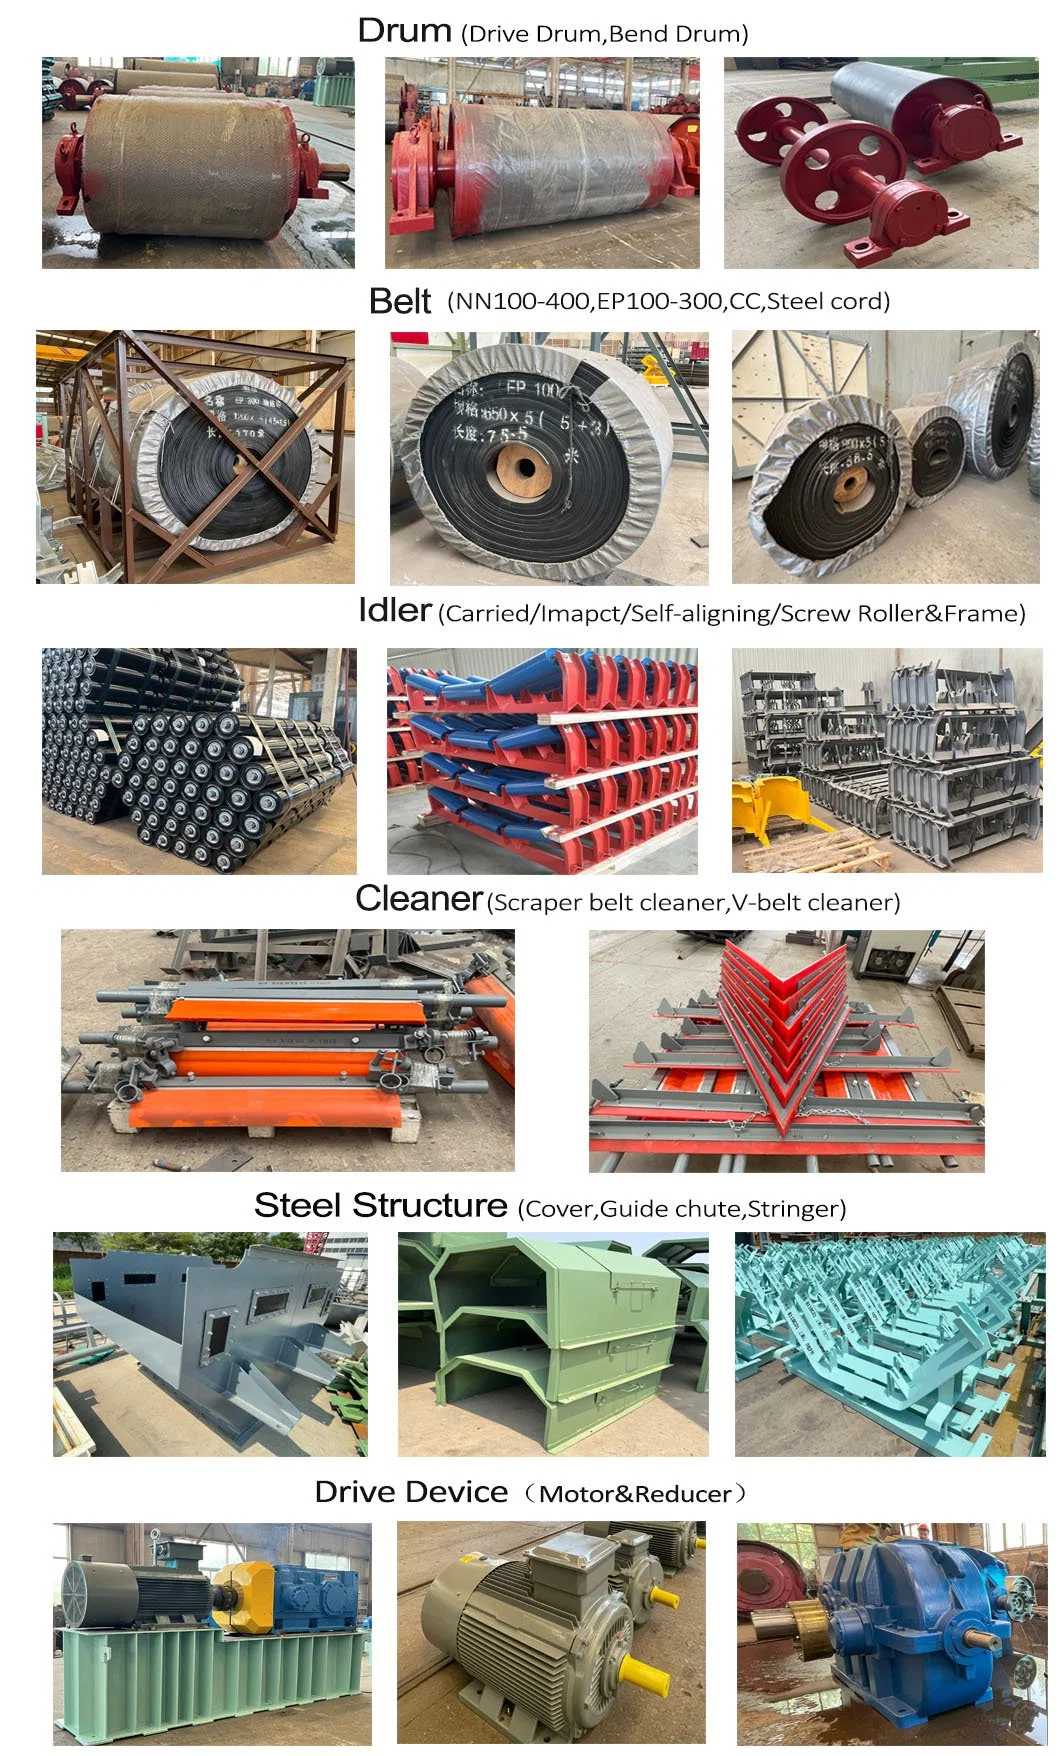 Heavy Duty Long-Distance Belt Conveyor System for Mining/Power Plant/Cement/Port/Chemical